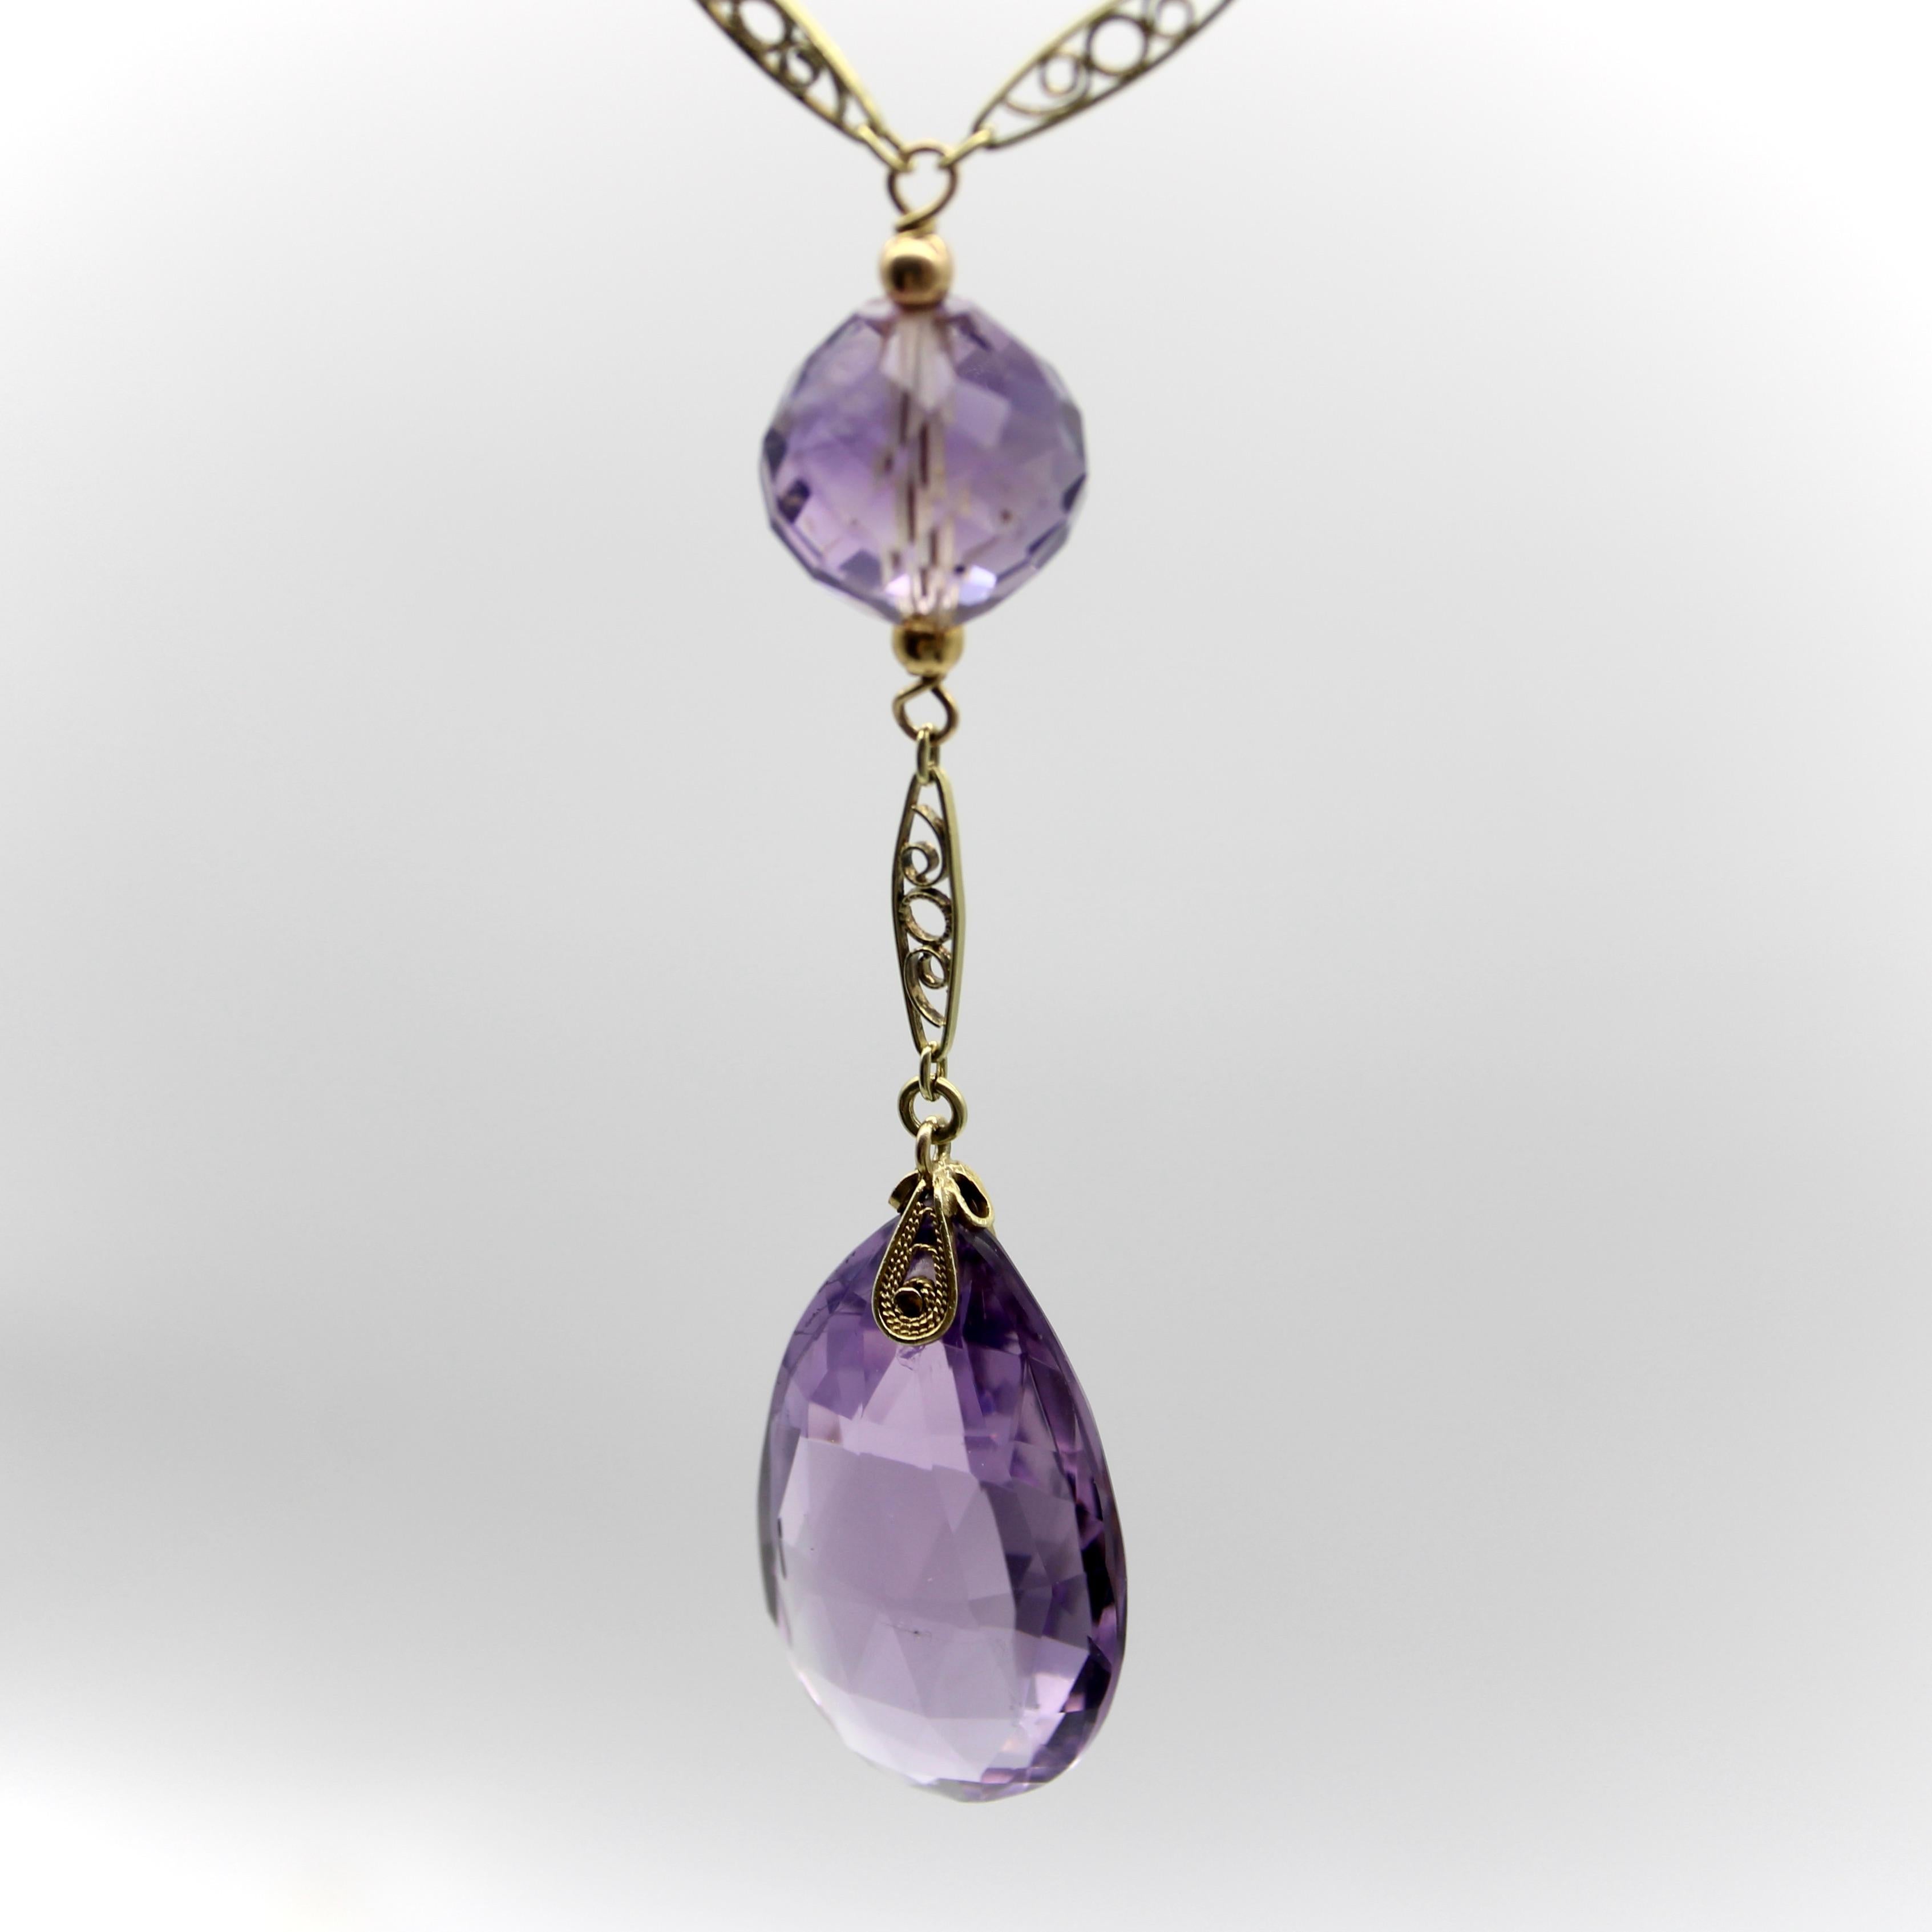 Edwardian 14K Gold Rose de France Amethyst Bead Necklace  In Good Condition For Sale In Venice, CA